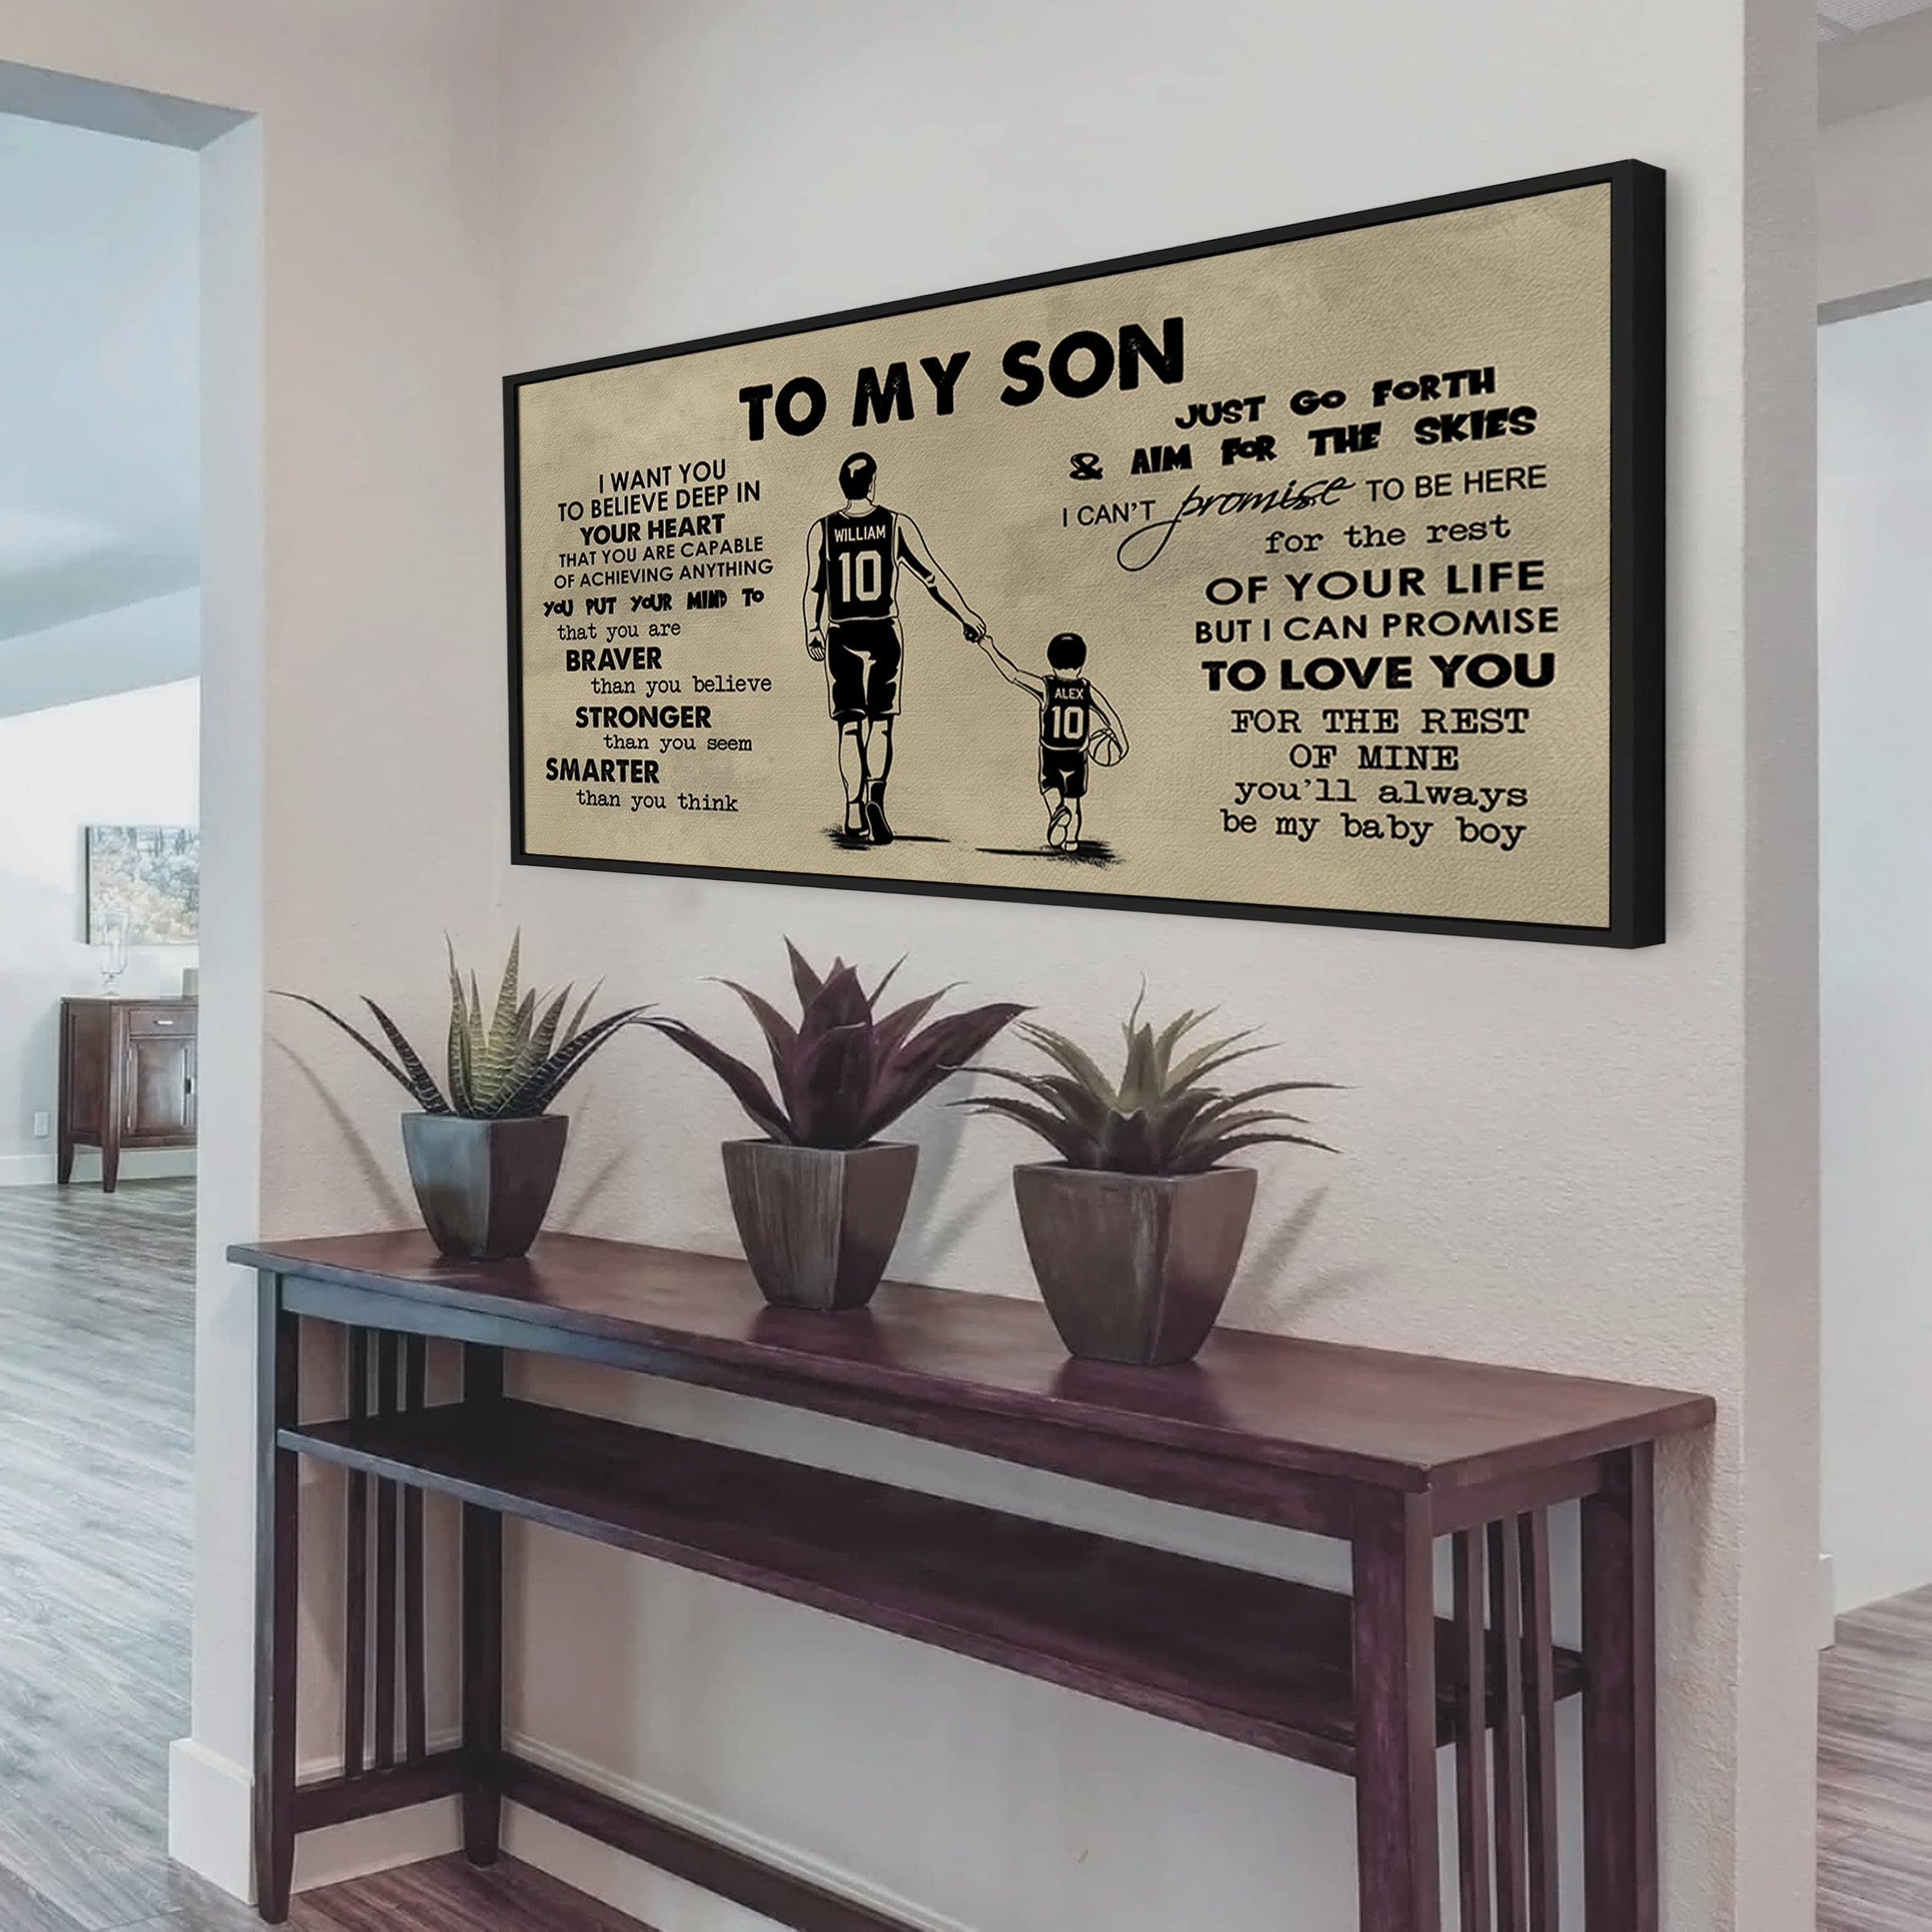 AMERICAN FOOTBALL TO MY SON- I WANT YOU TO BELIEVE- CANVAS POSTER